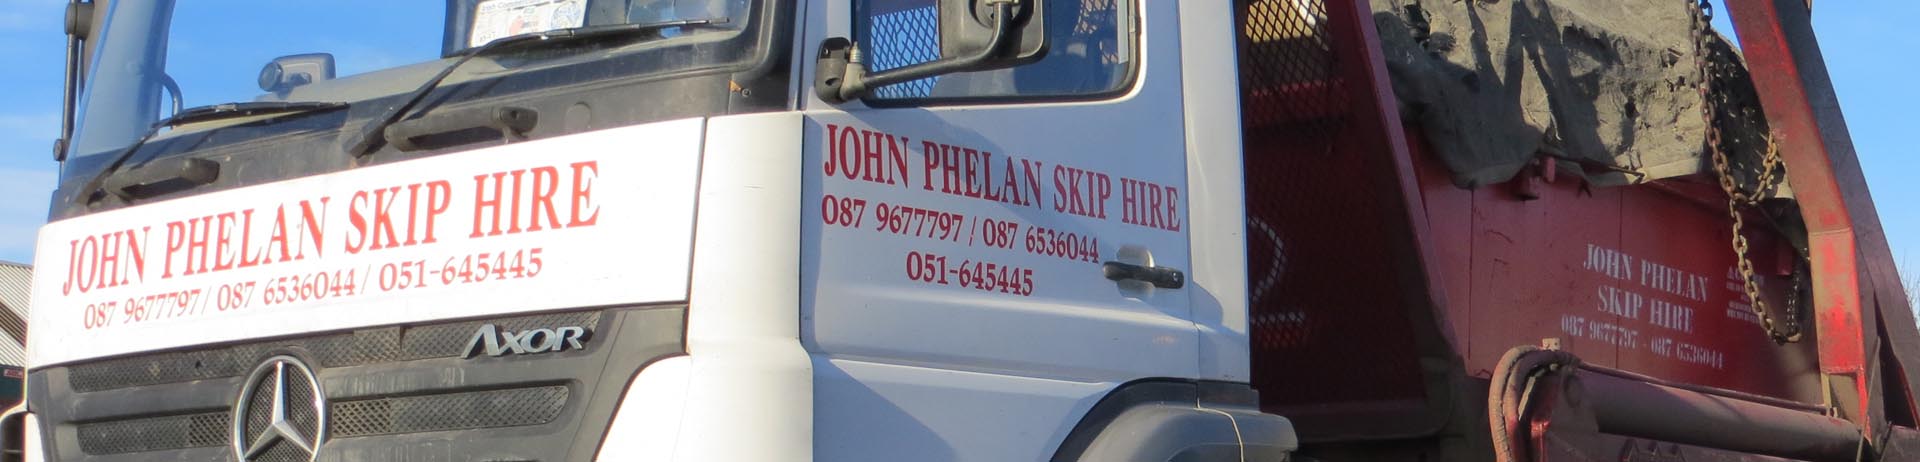 skip hire in waterford image